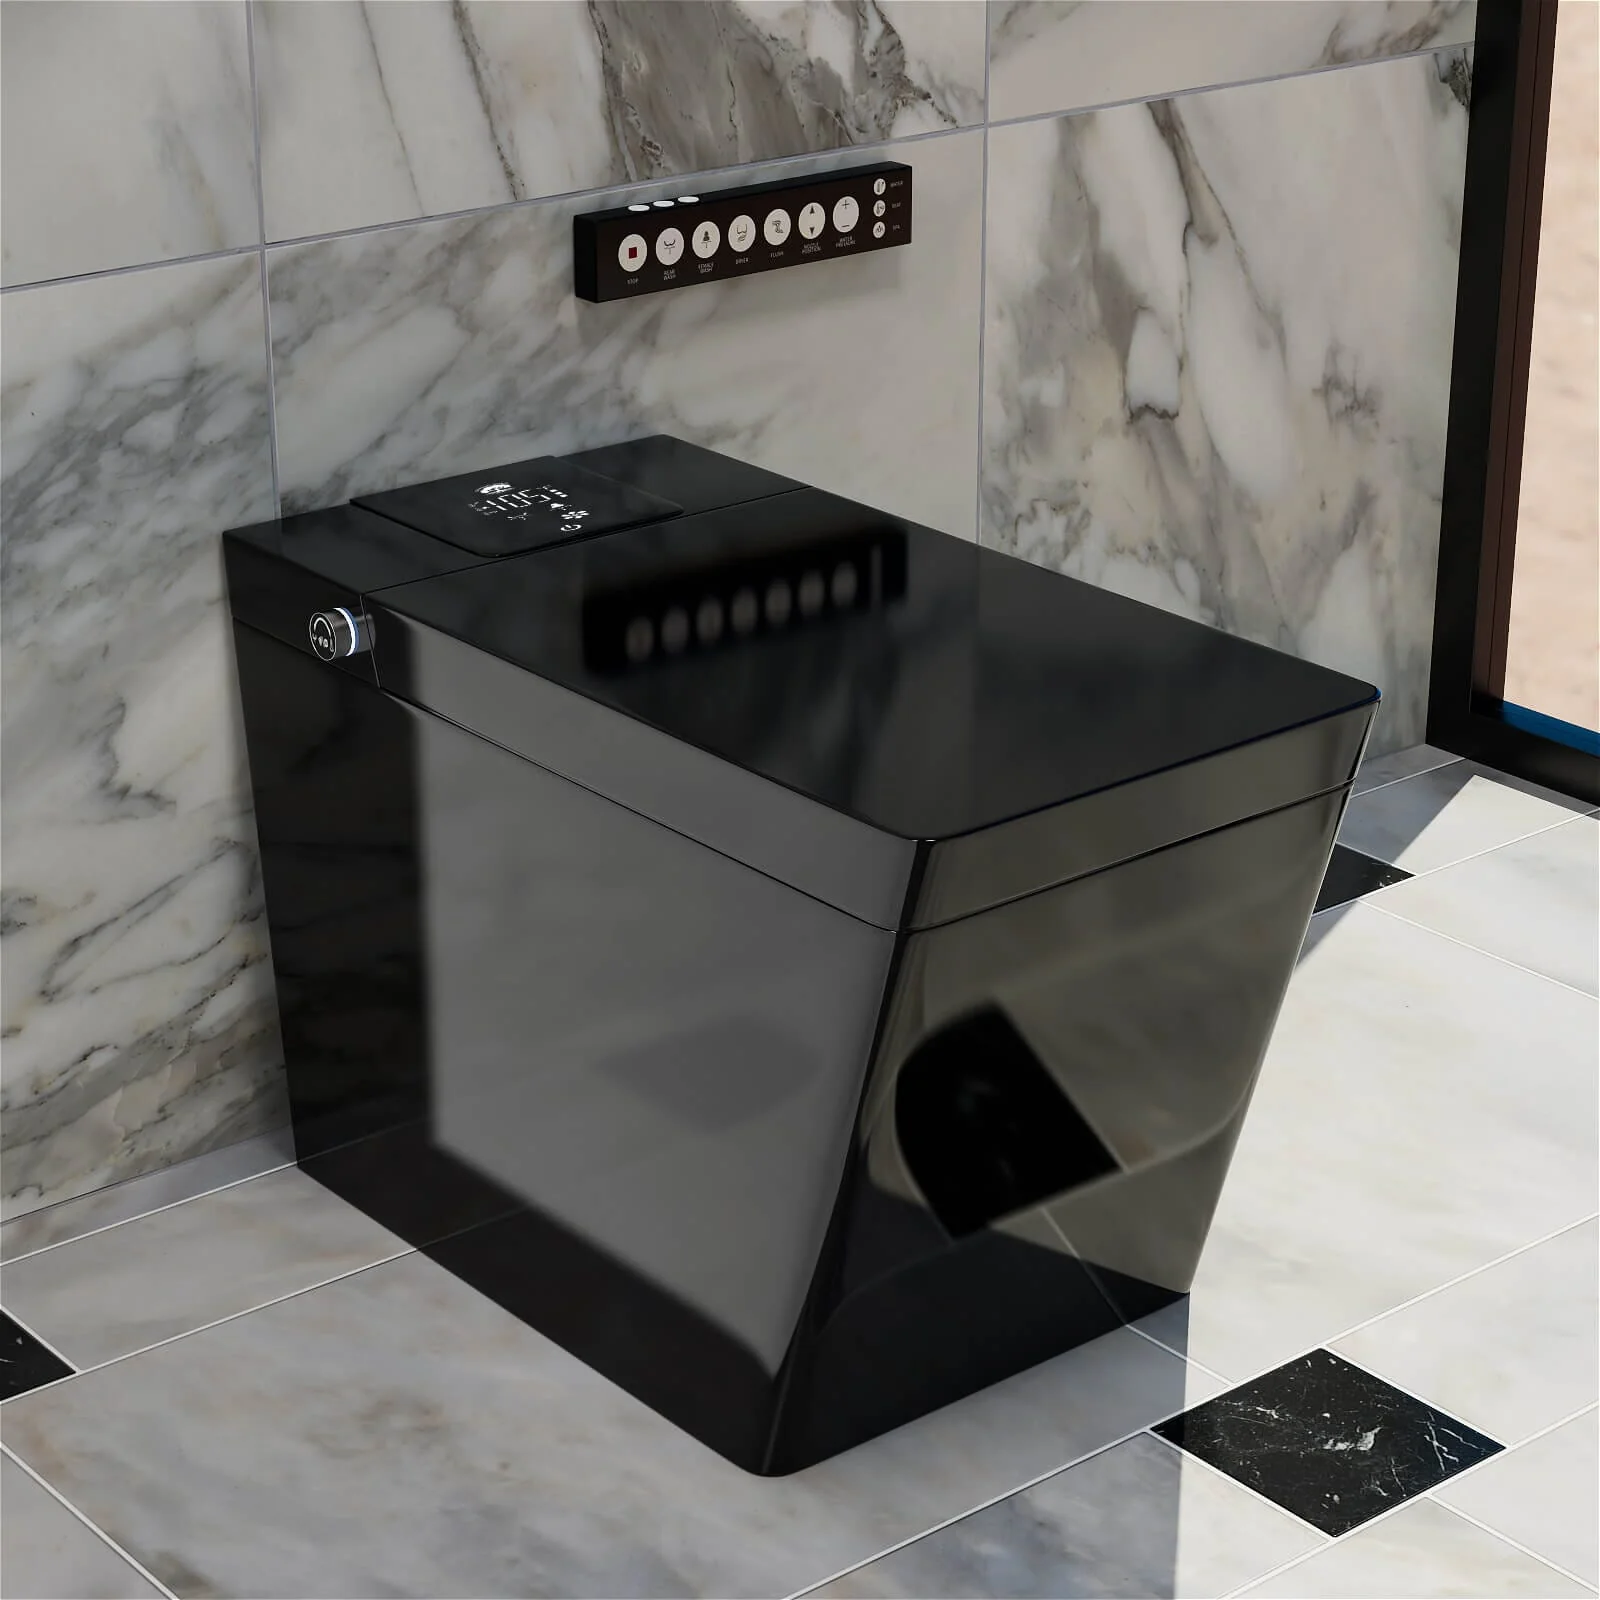 Additional glossy balck square toilet costs